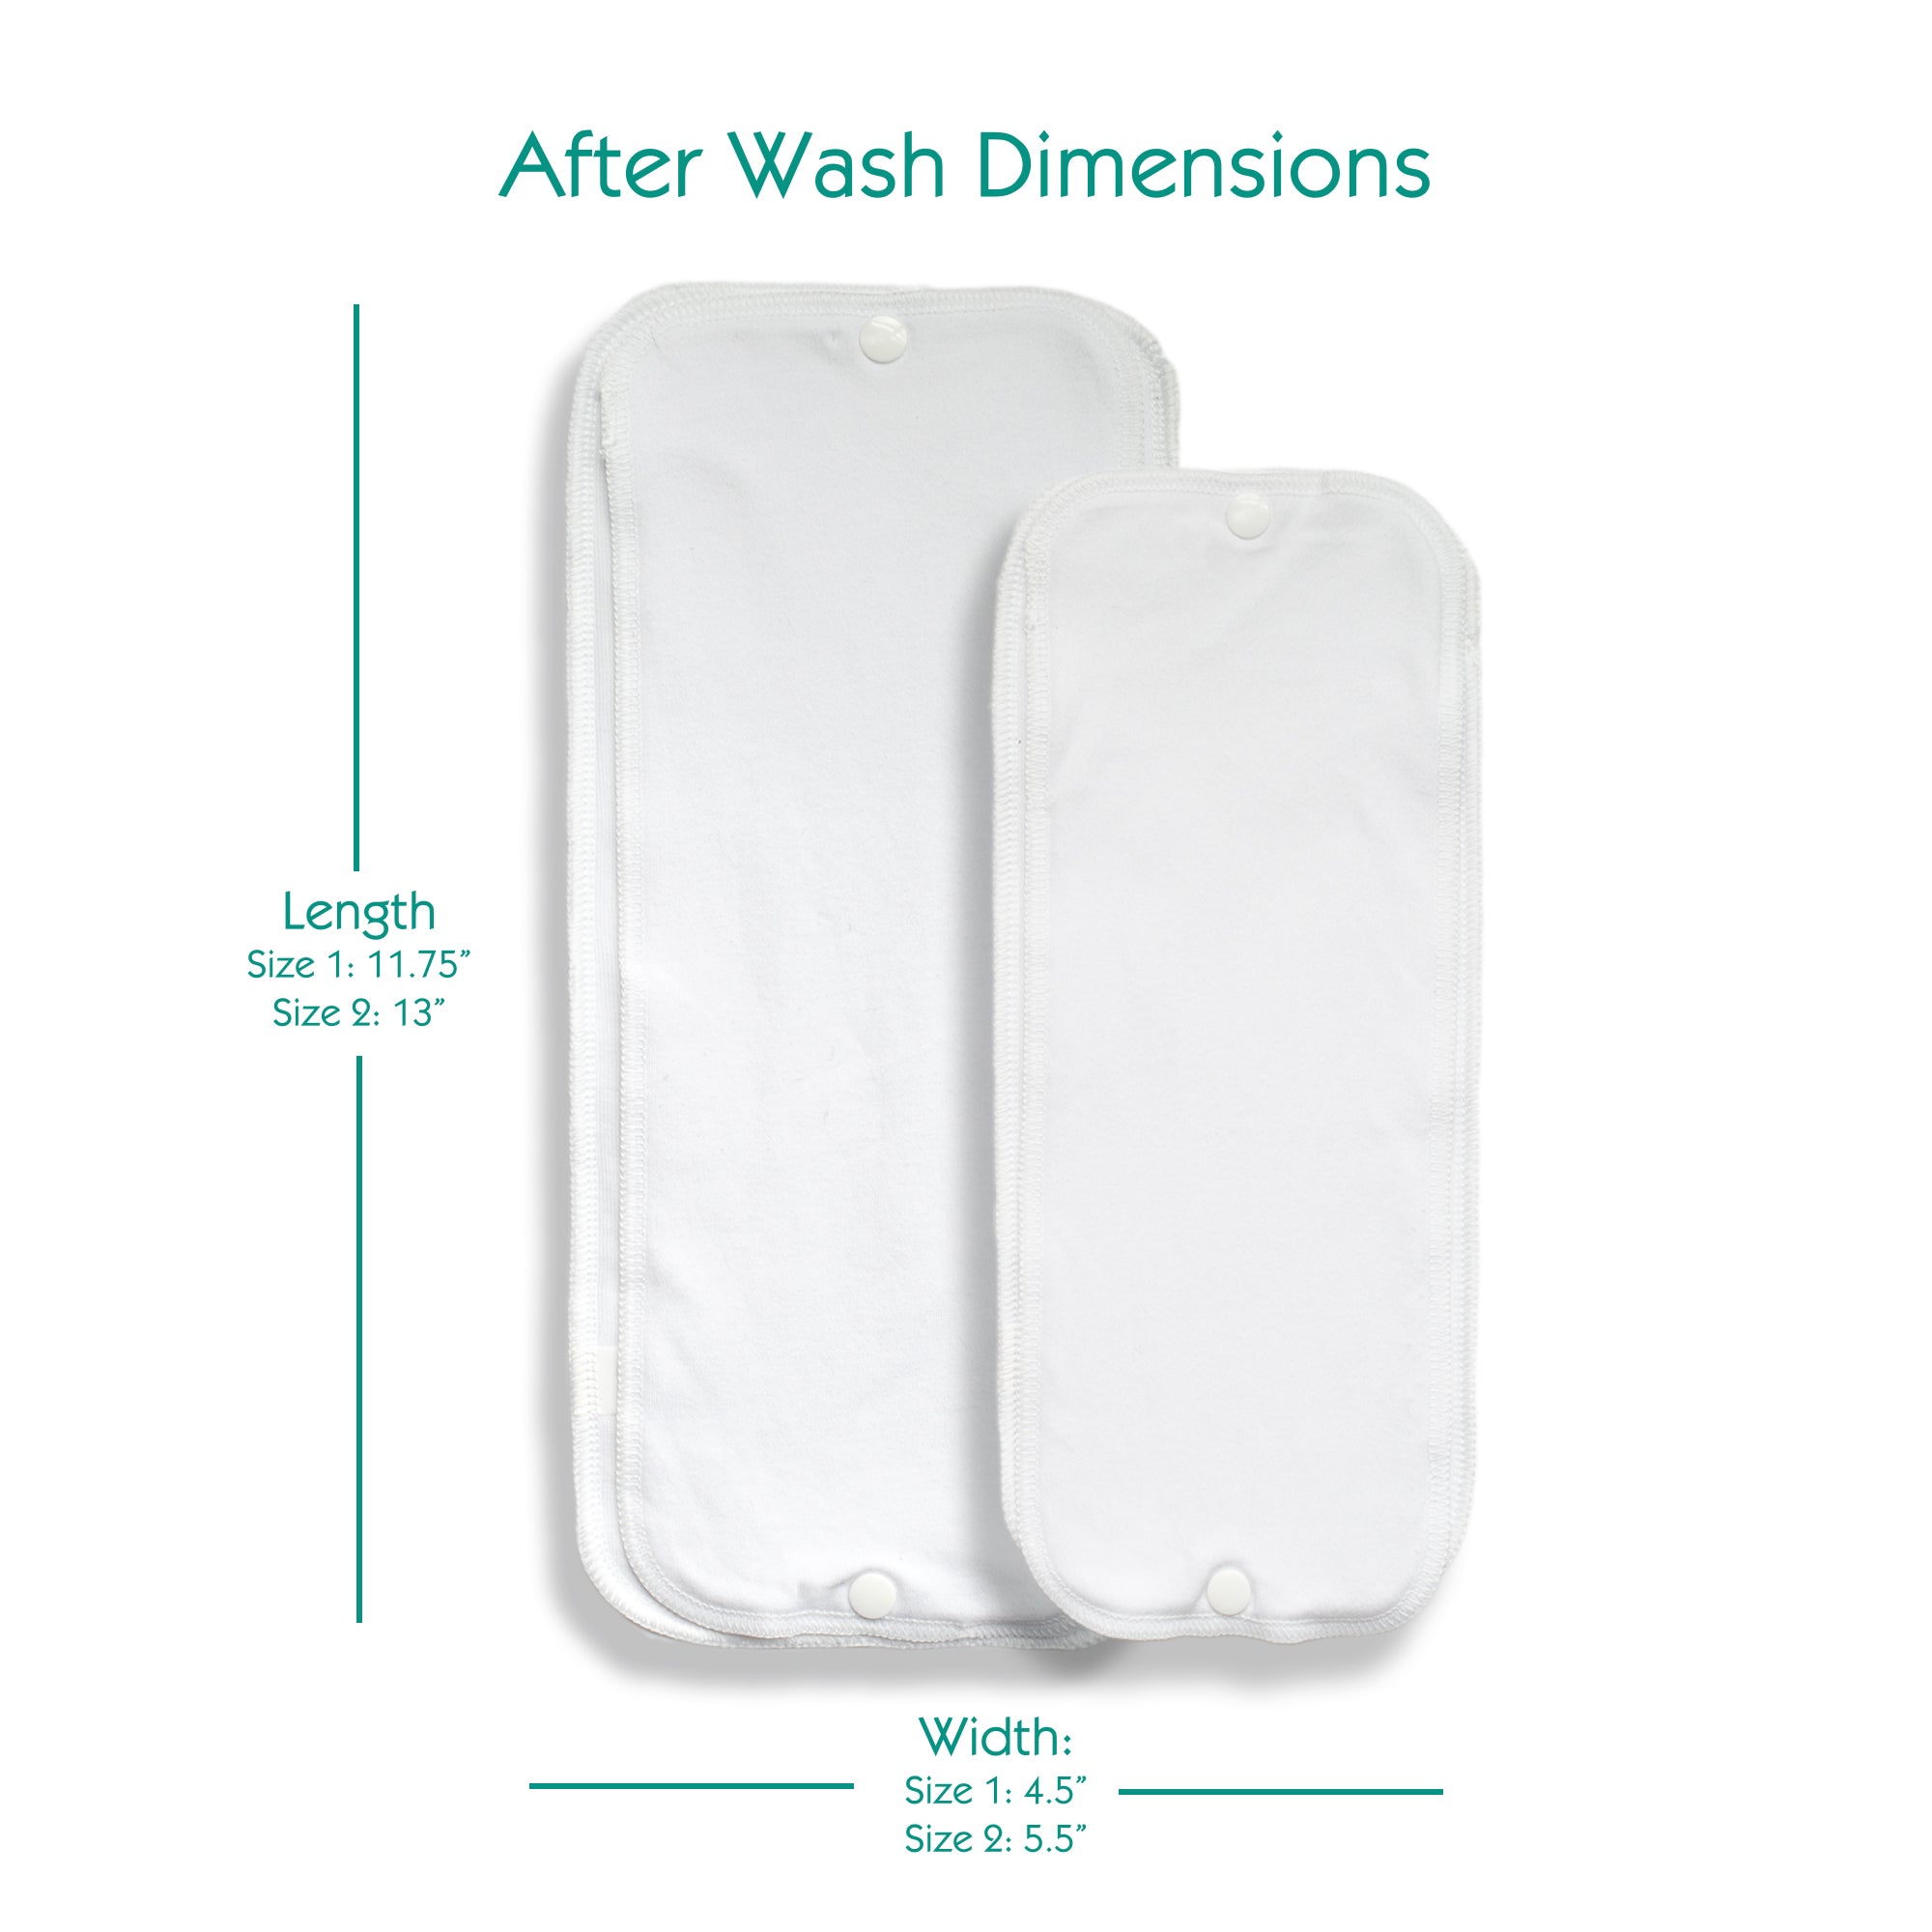 -Image of Thirsties Natural Duo Insert after wash dimensions